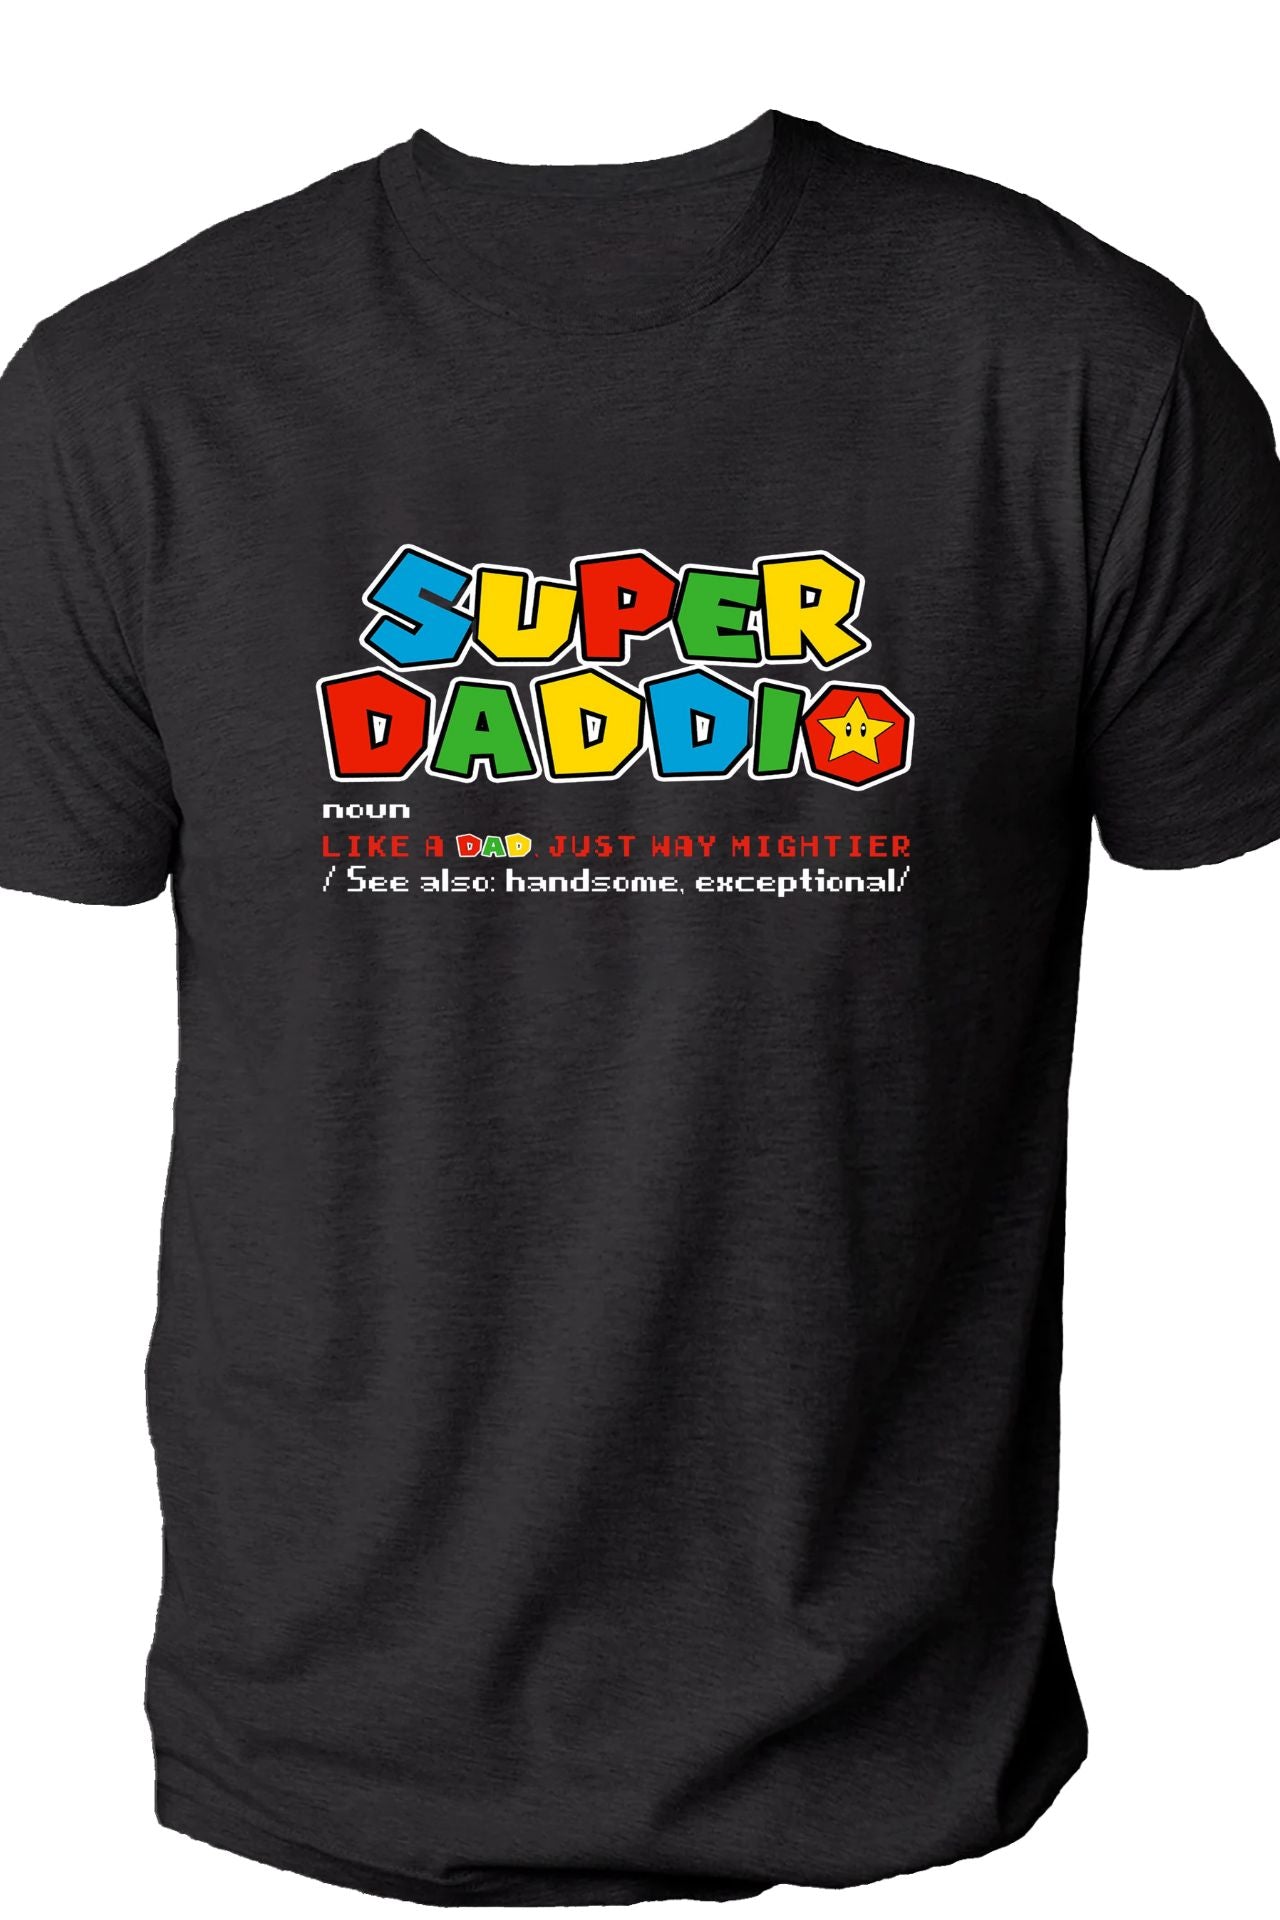 Rodfather T-shirt, Daddy Shirt, Funny Dad Fishing Shirt, Super Dad, Cool  Dad, Father's Day Shirt, Fishing Life, Family Shirt, Gift for Dad 